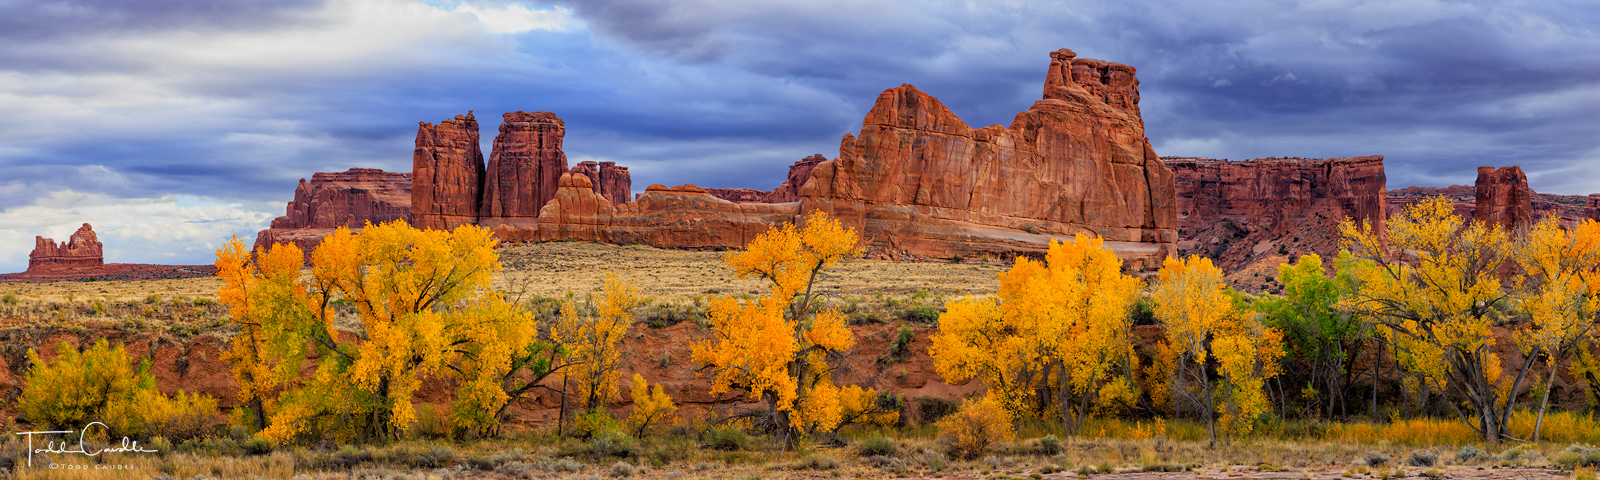 Colorful autumn cottonwoods line the banks of a usually dry wash as oddly shaped sandstone formations rise beyond.